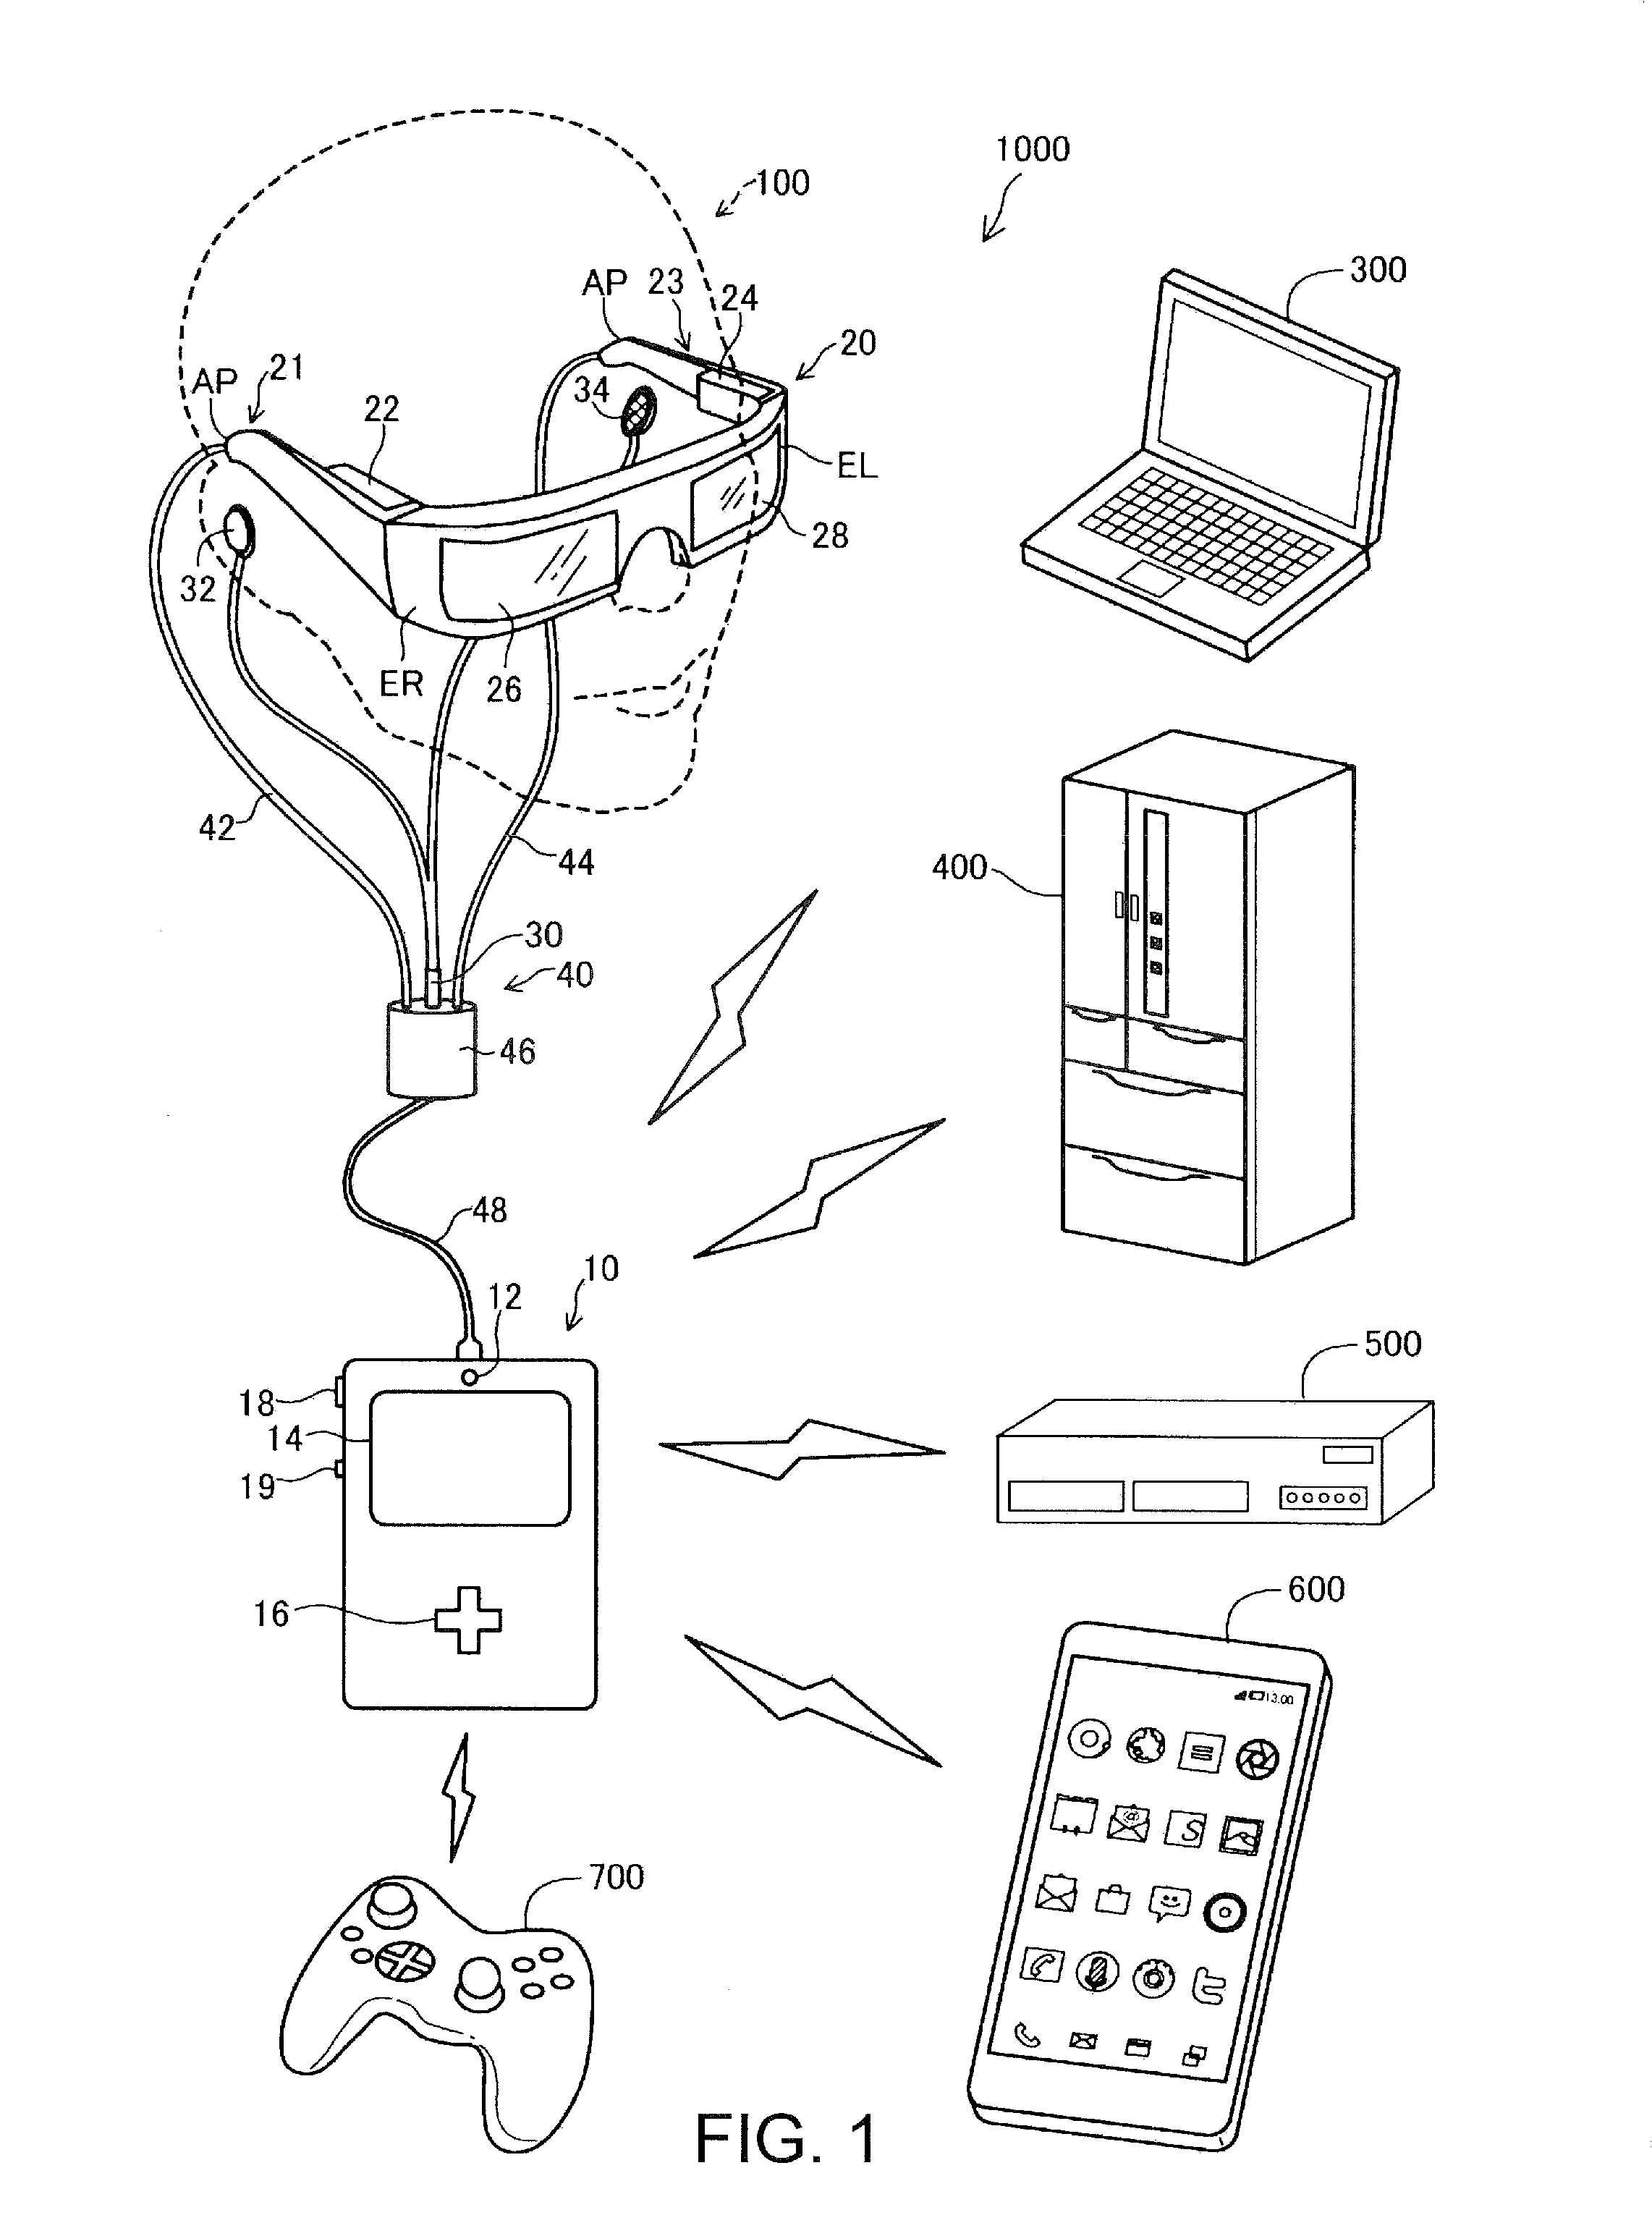 Image display device, method of controlling image display device, computer program, and image display system